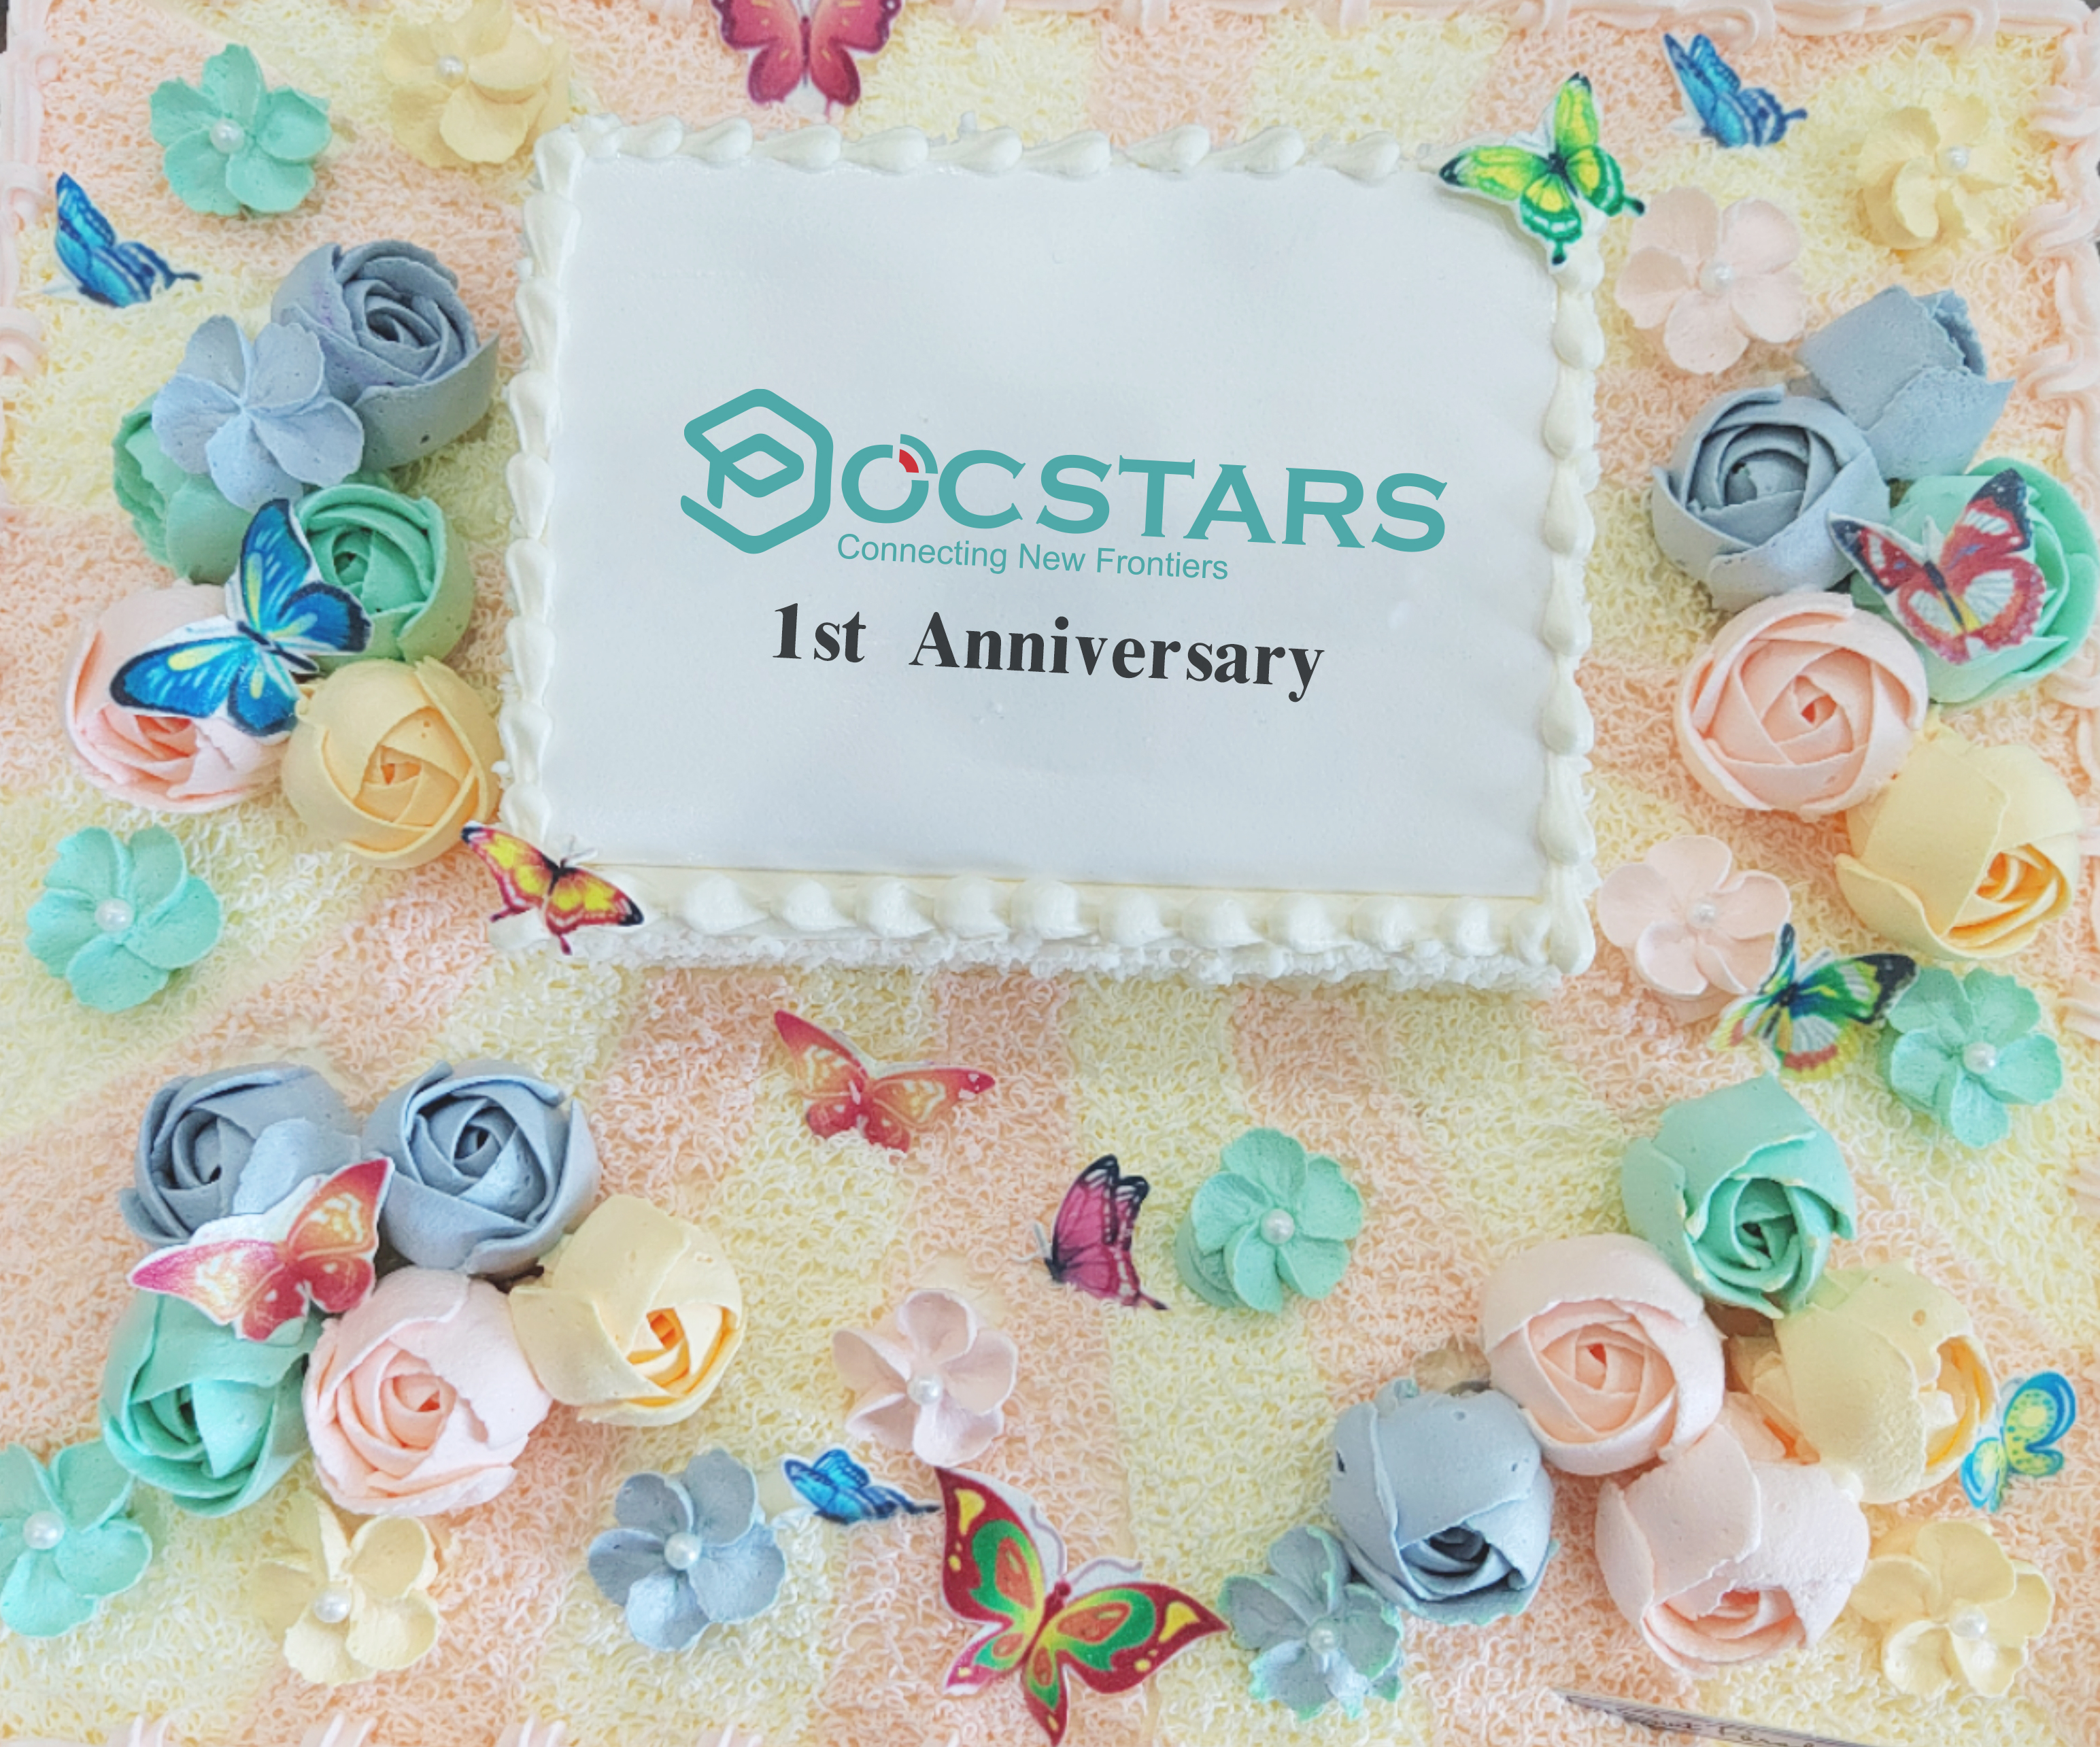 POCSTARS Celebrates First Anniversary of New Office in Shenzhen